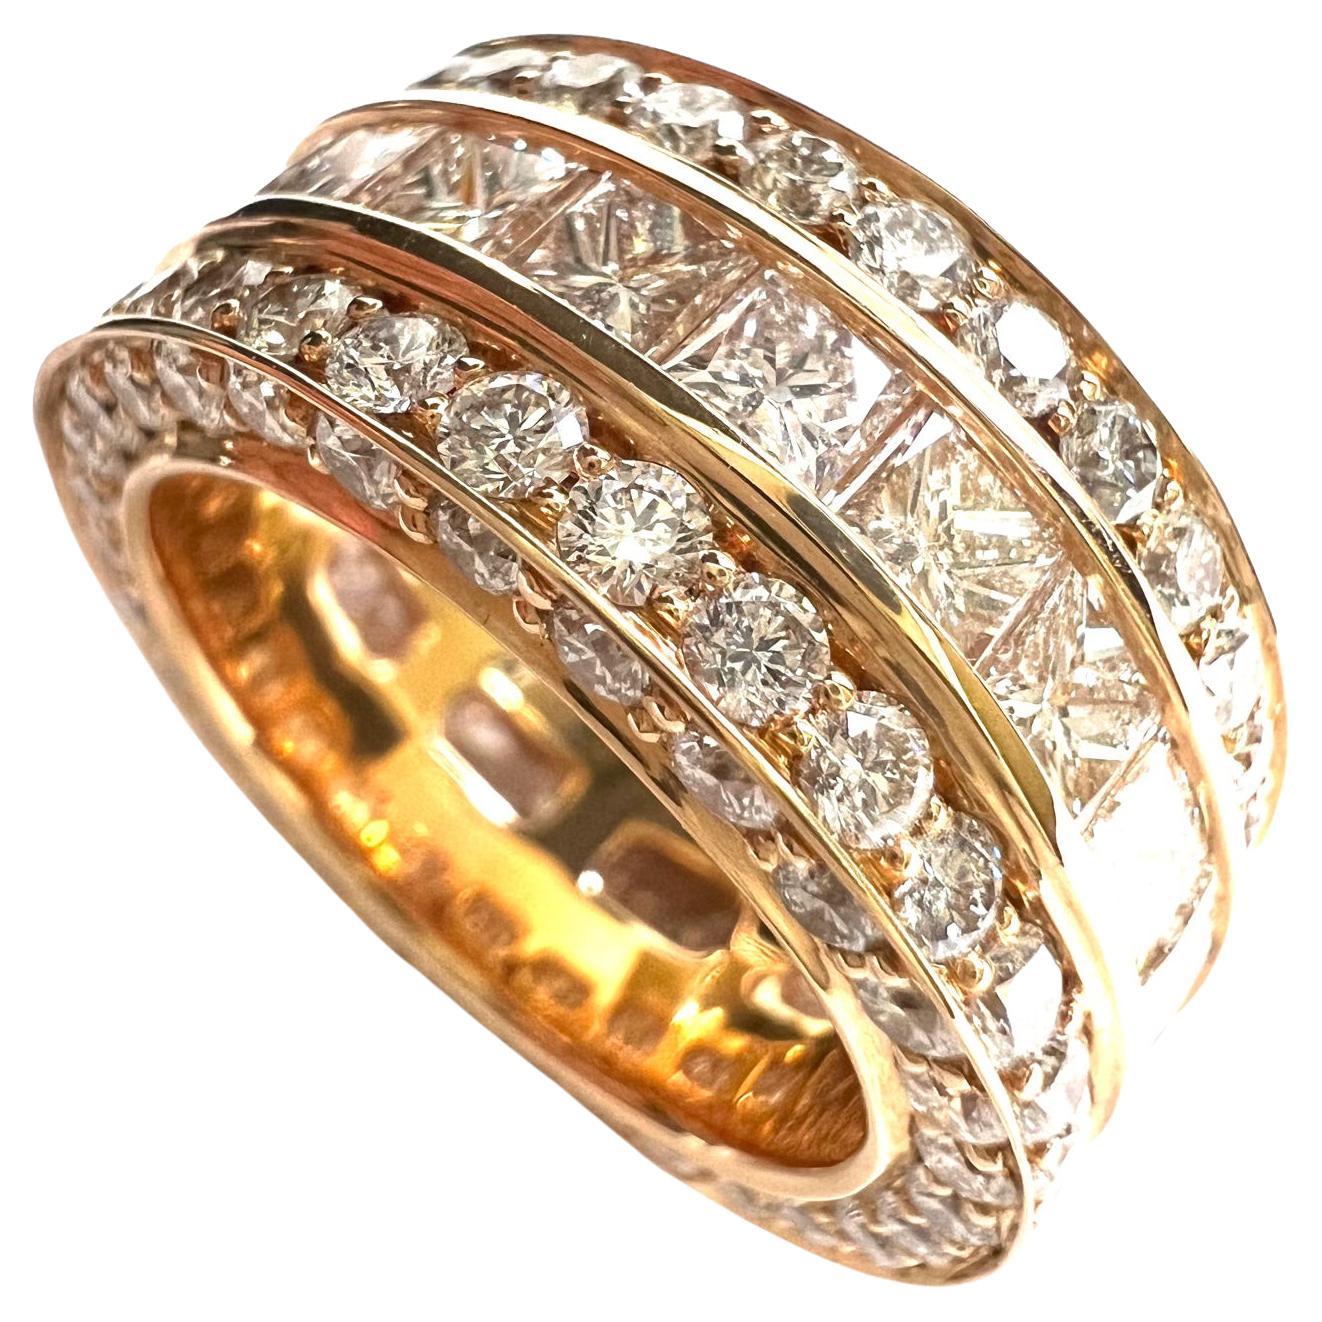 Ring in Red Gold with Diamonds